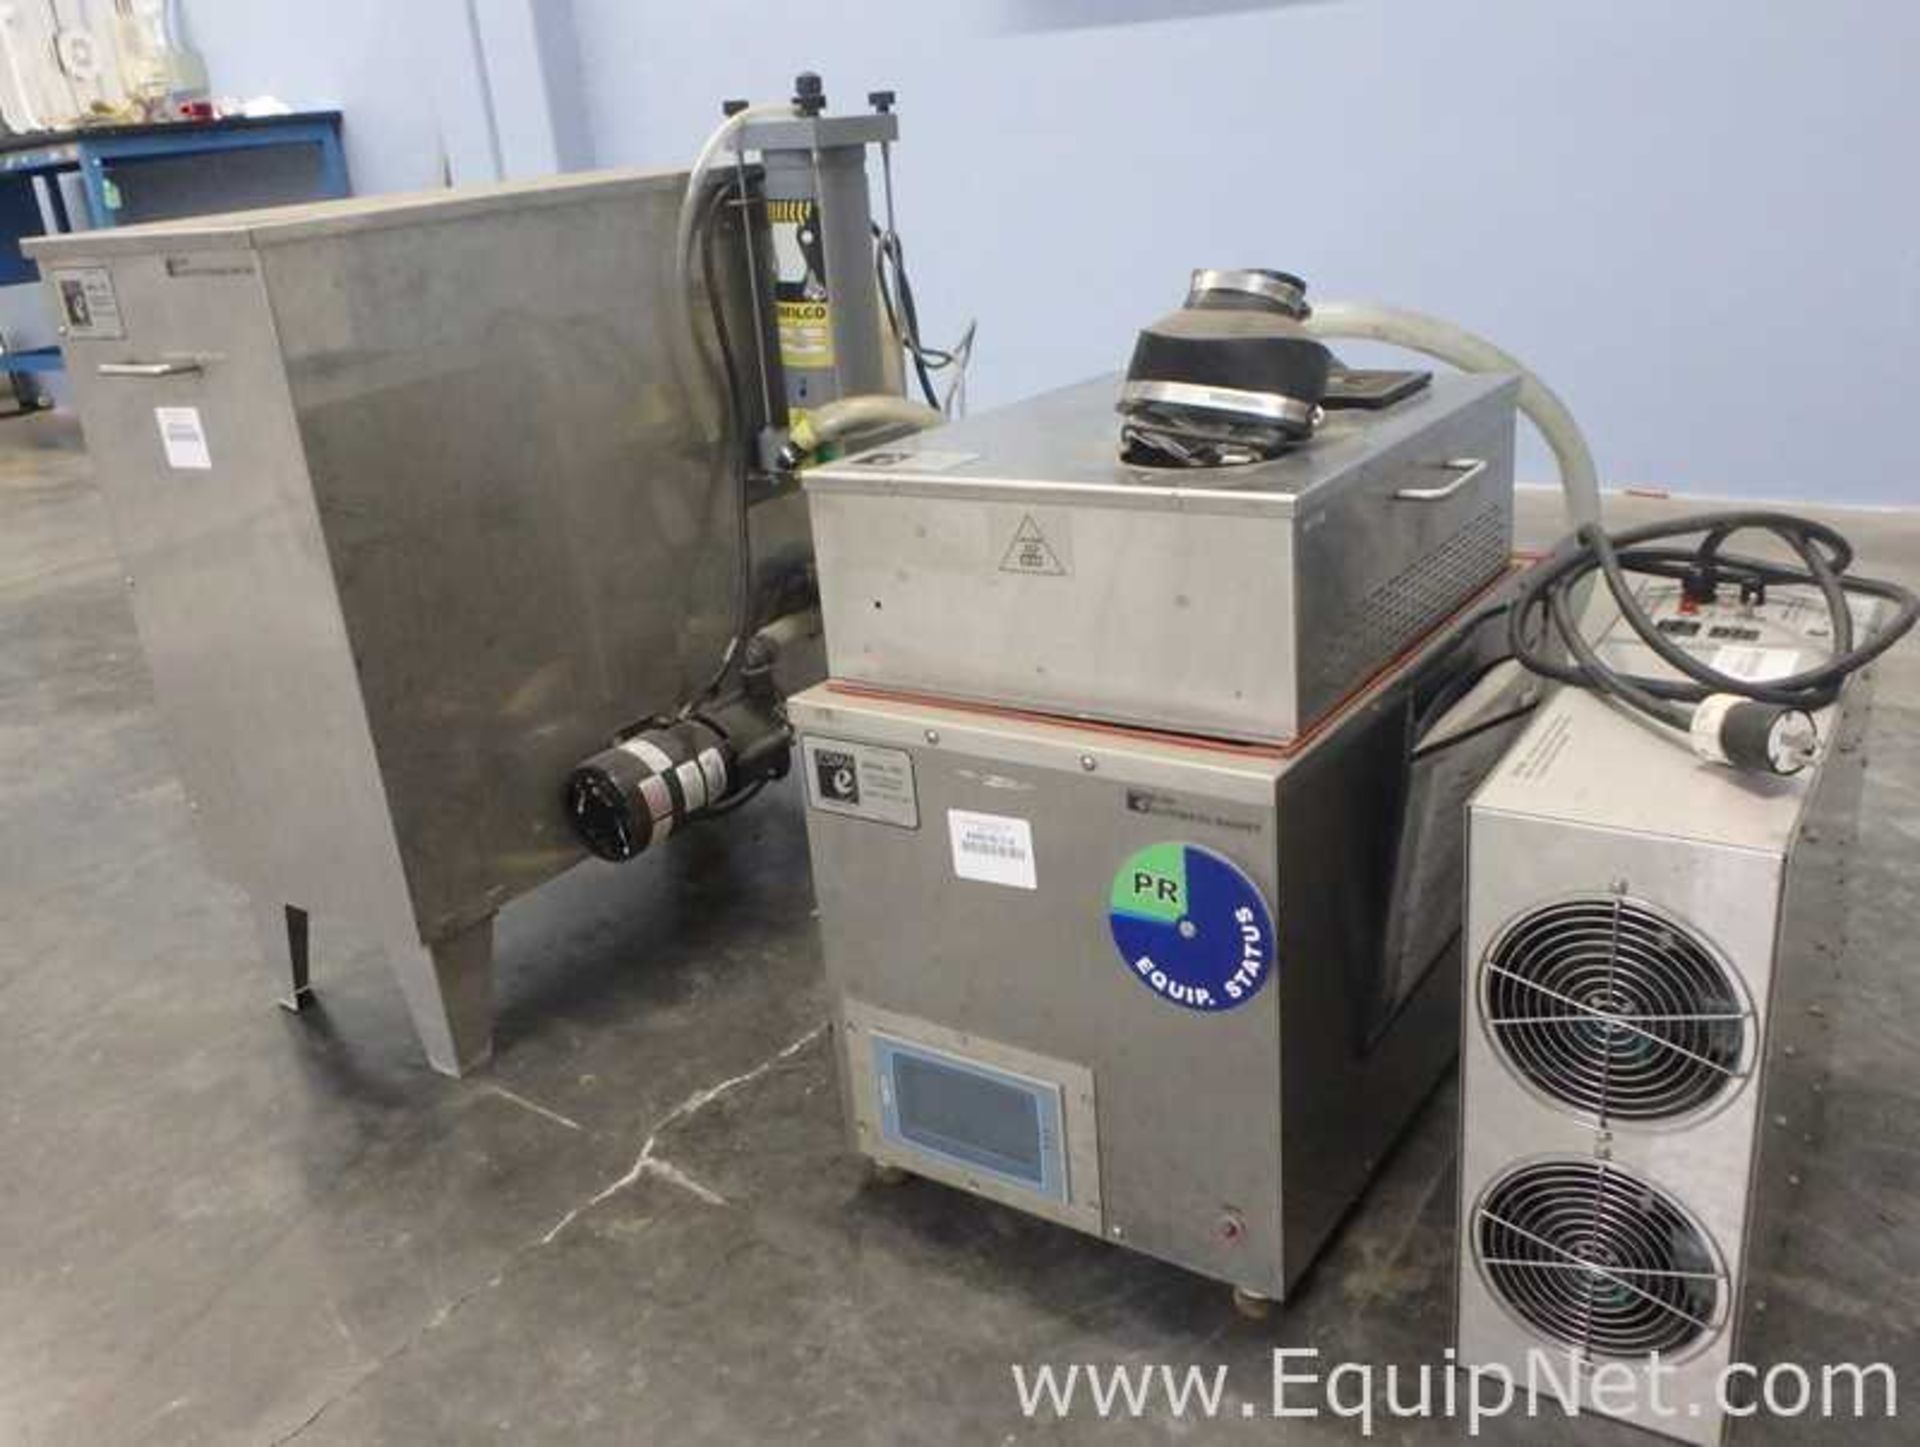 ESMA Inc. E700 Ultrasonic Cleaning System with E997 30Gal Heated Storage Tank - Image 13 of 38